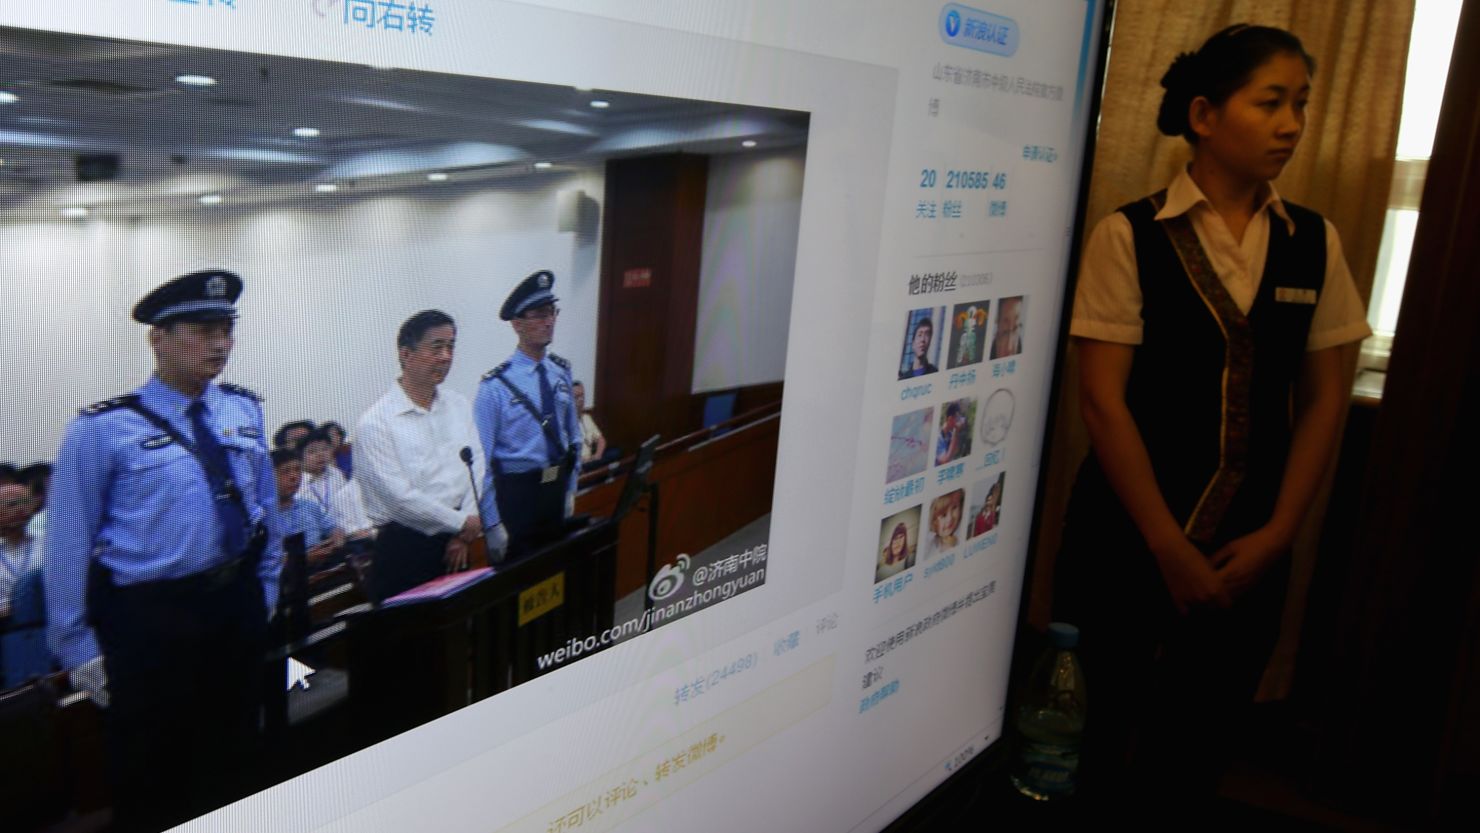 The crackdown against online rumors comes at a time when China is trying to curb corruption among officials.